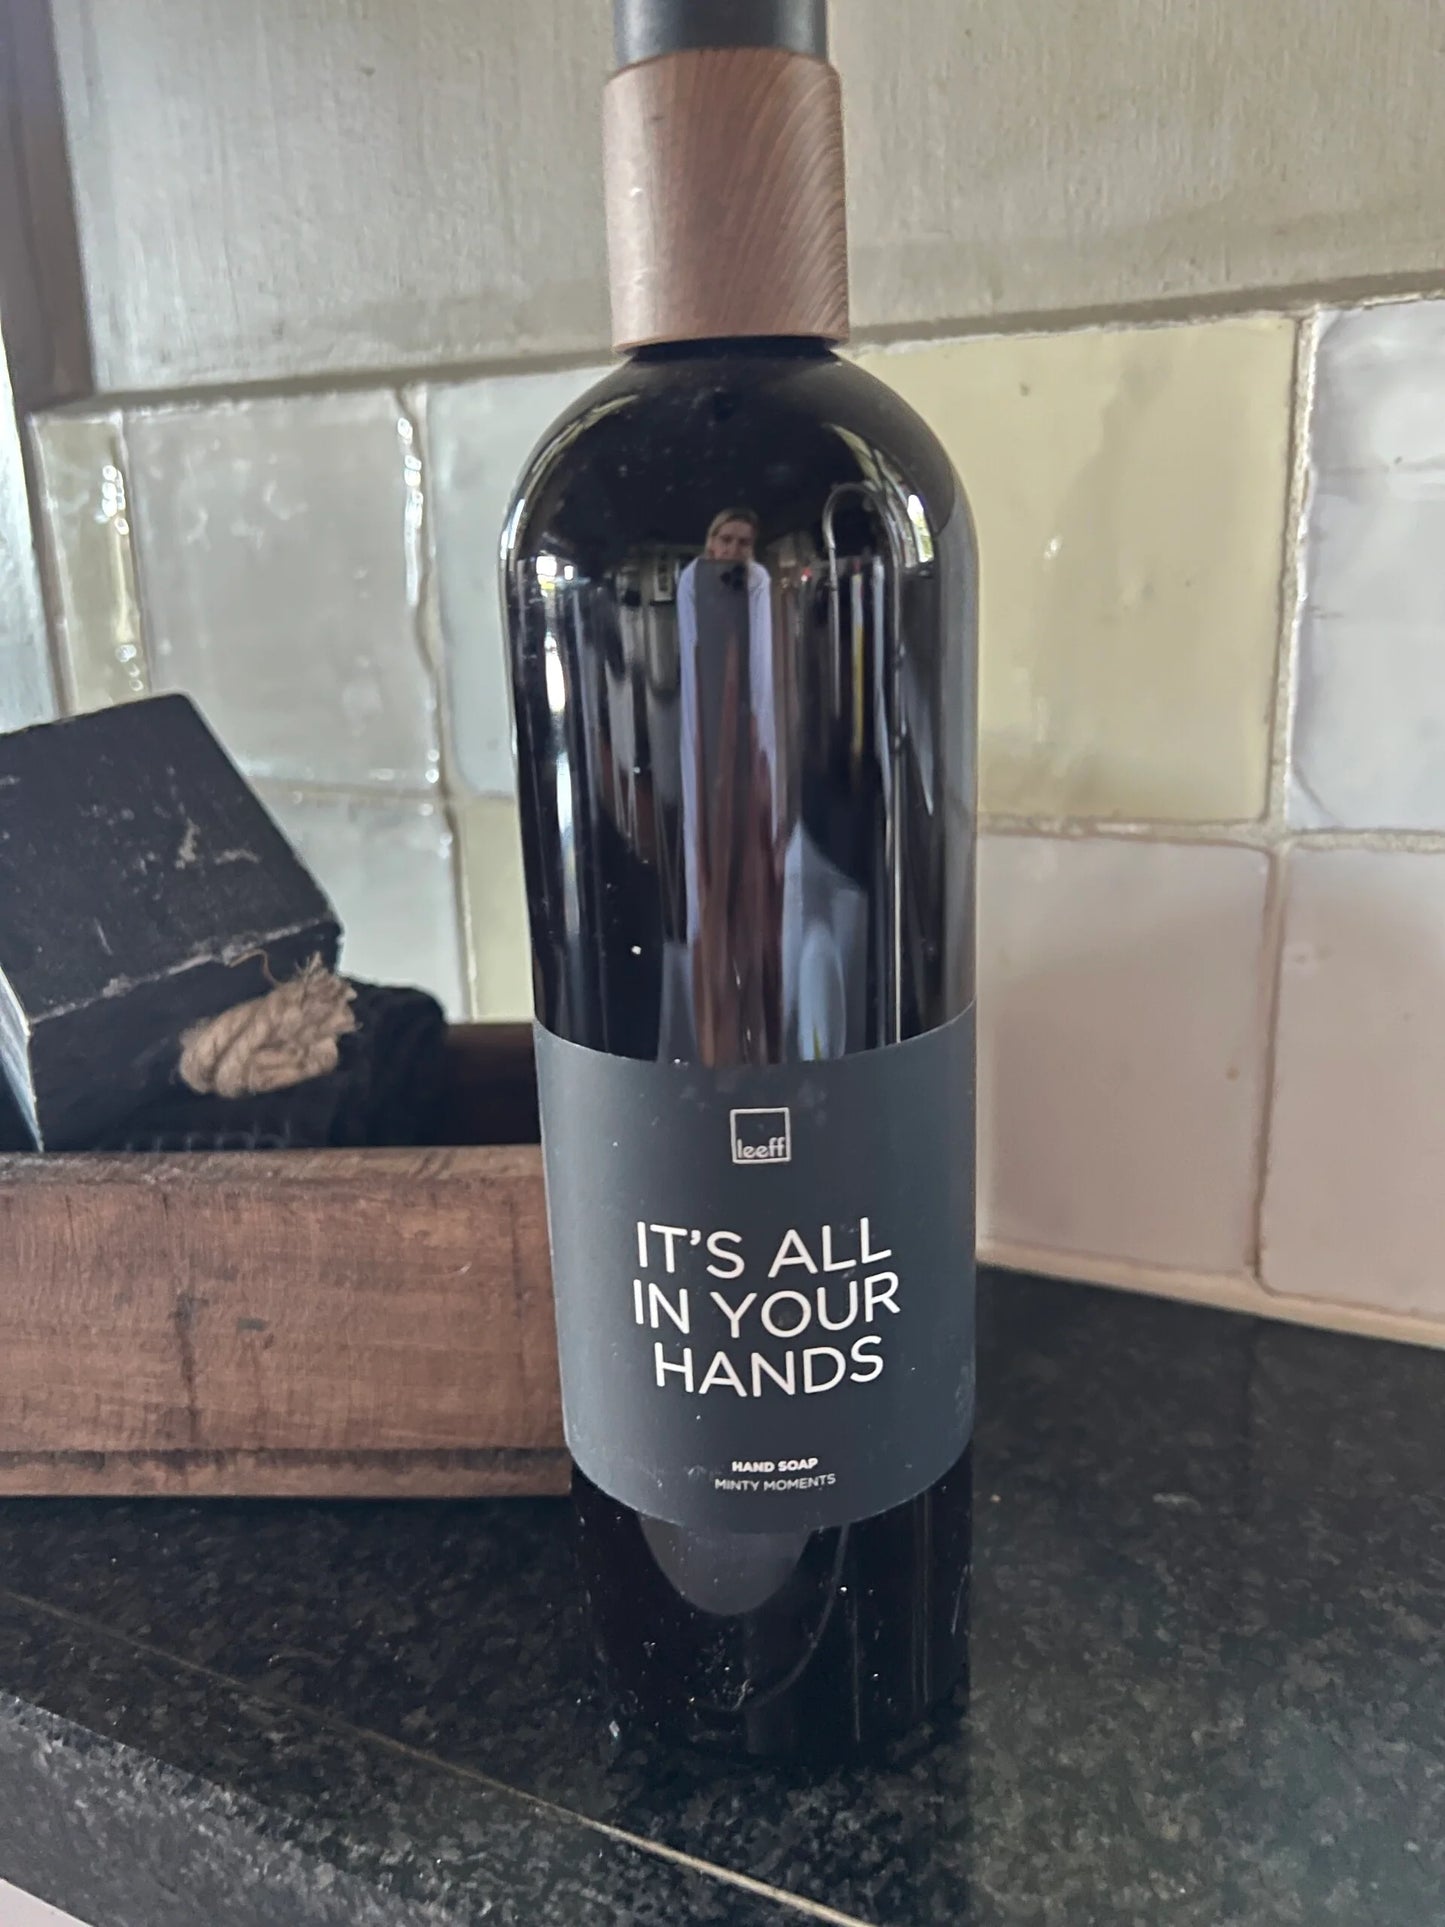 Hand soap "It's all in your hands"